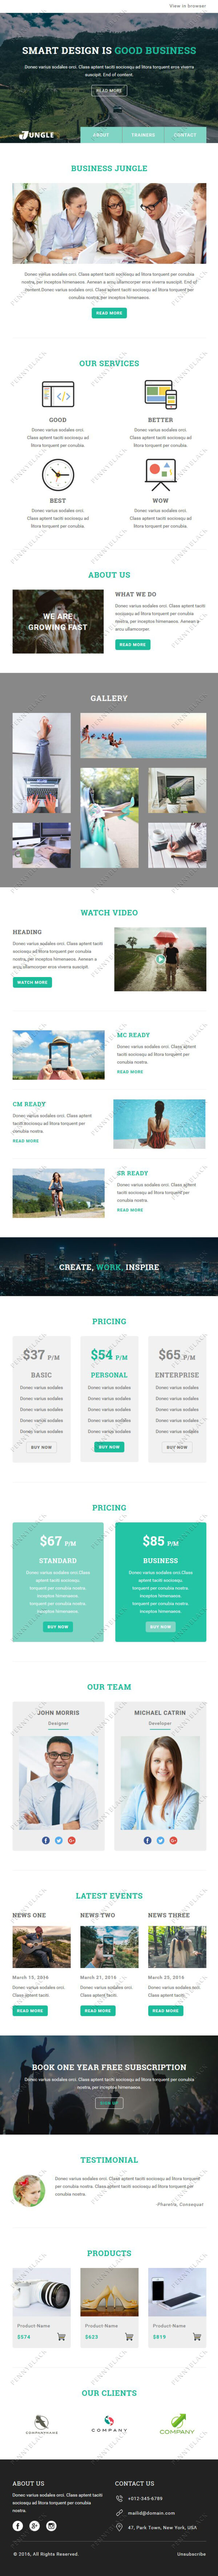 Jungle - Responsive Email Template